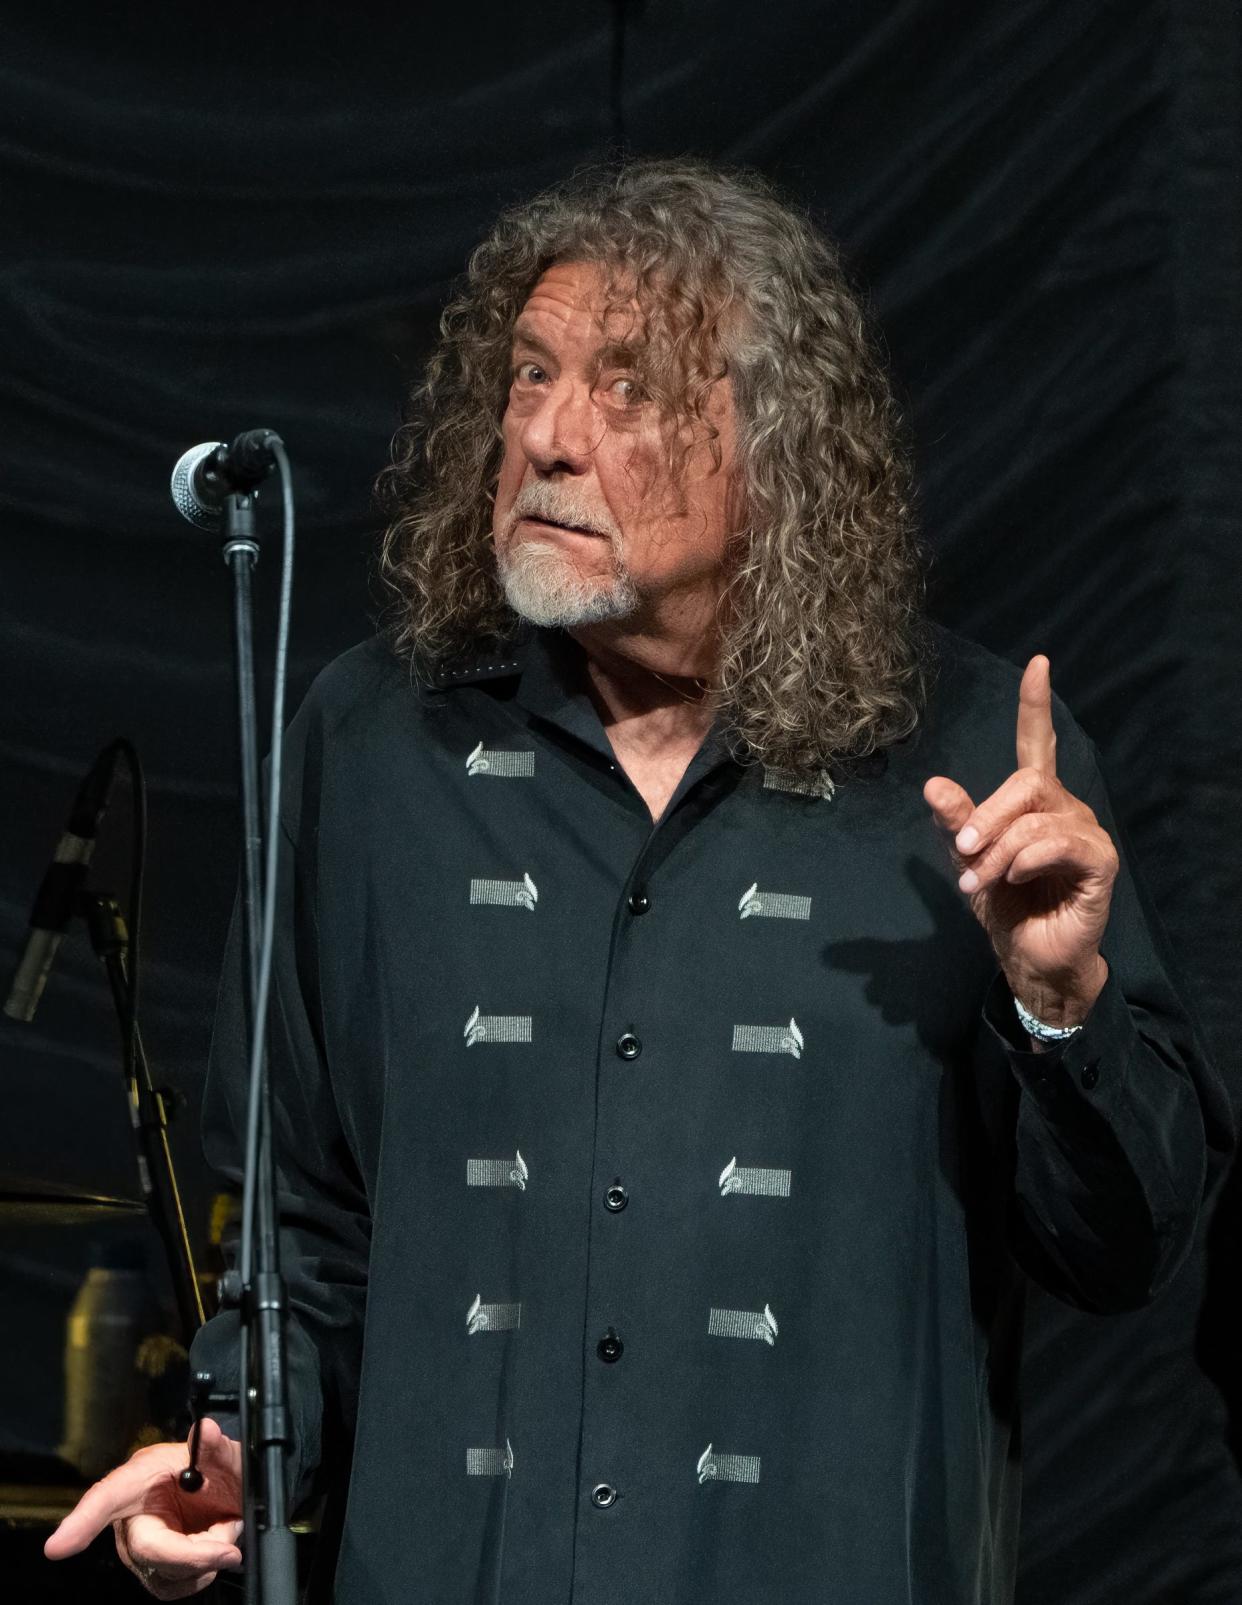 Robert Plant and Alison Krauss perform on their Raising the Roof Tour at the Louisville Palace on May 2, 2023.  Doors open at 7 p.m.